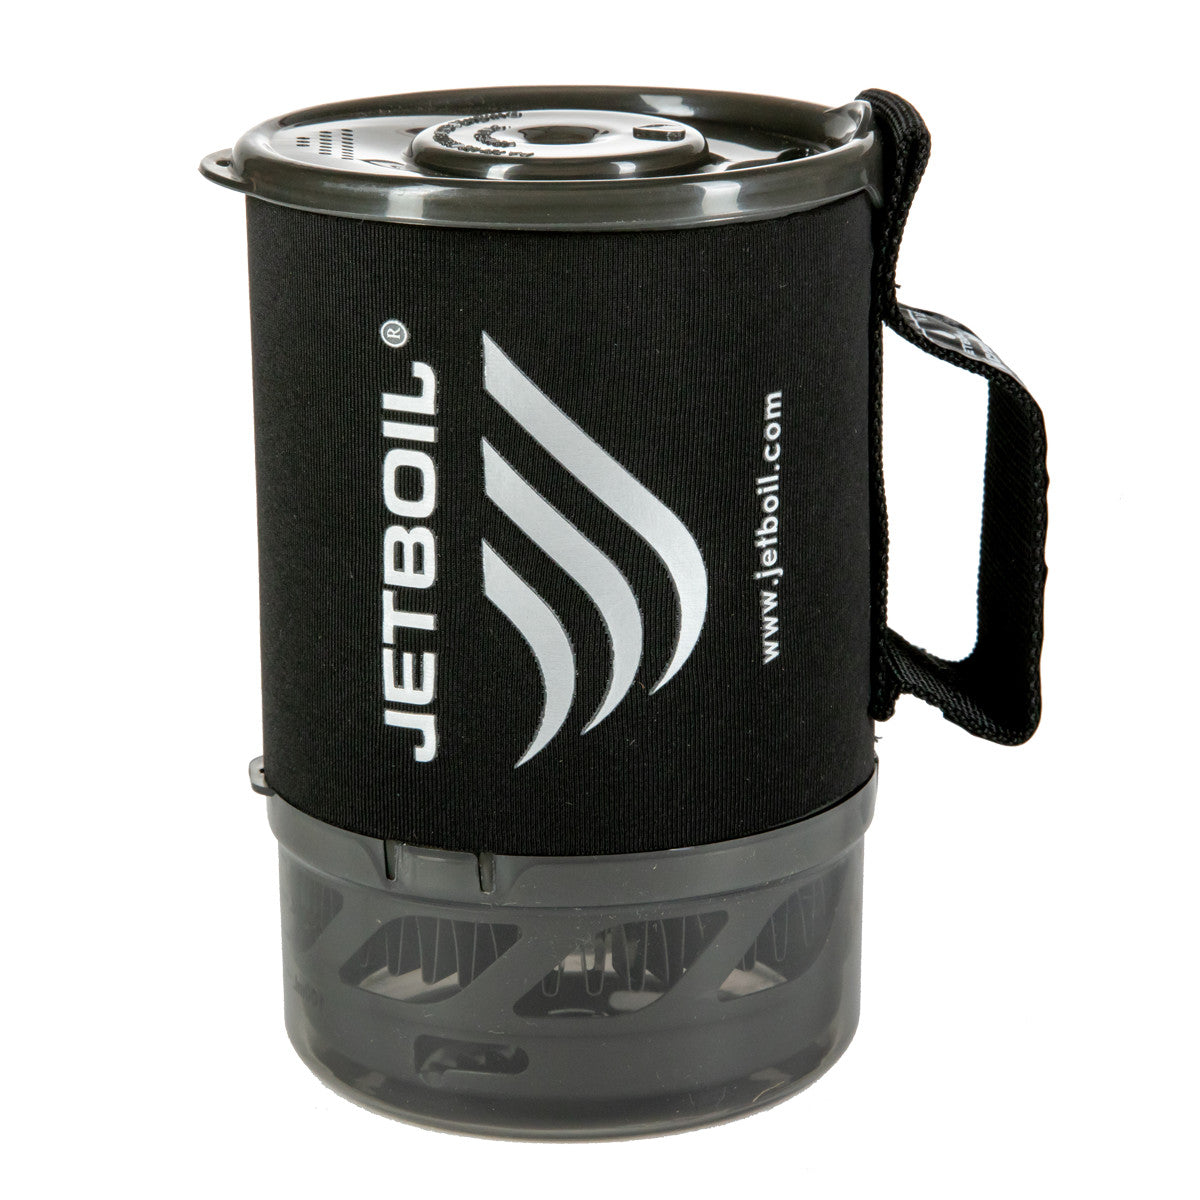 Jetboil MicroMo Cooking System - Gear For Adventure